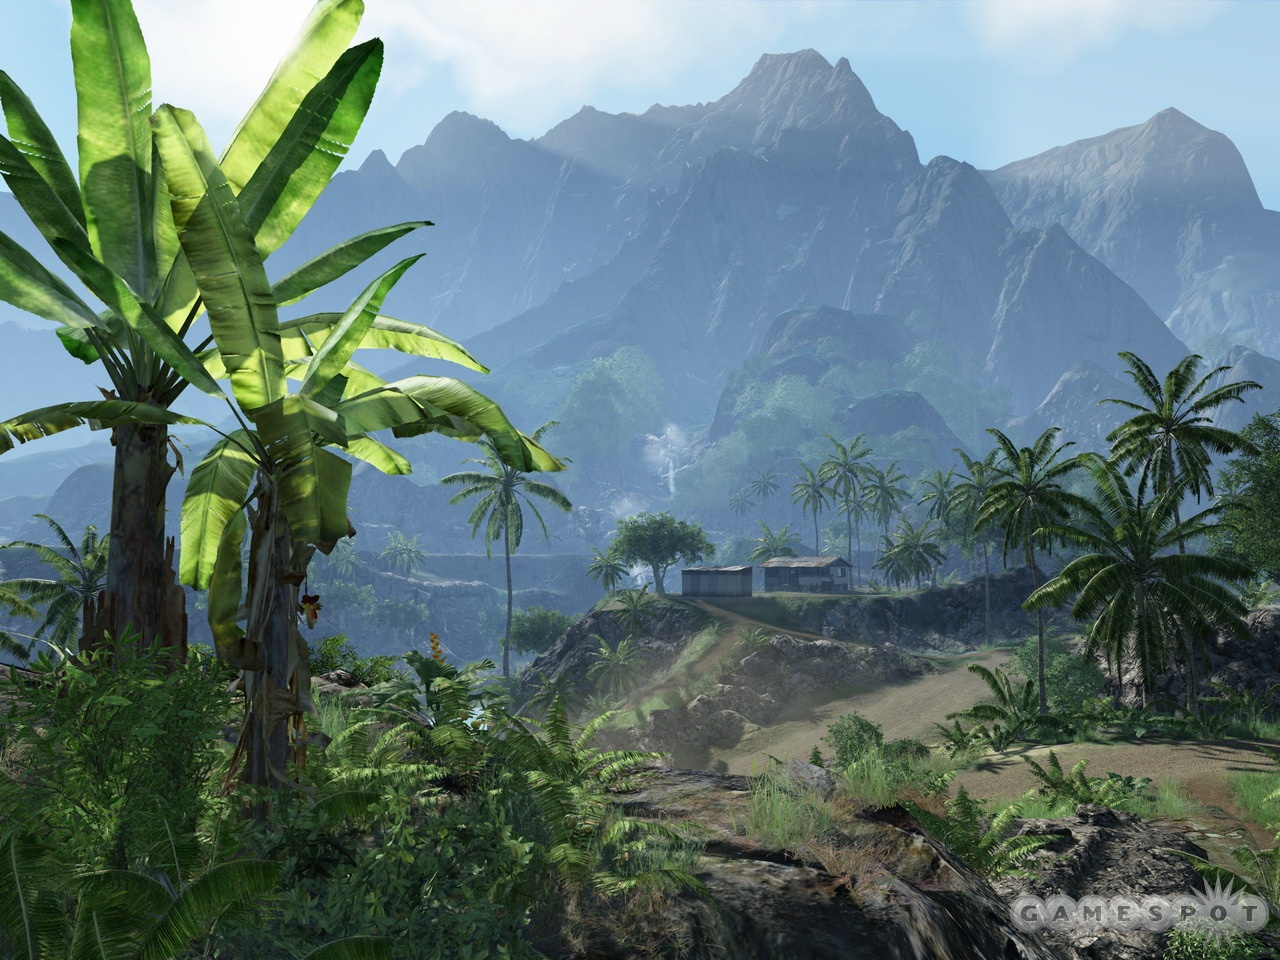 Crysis will make use of advanced graphics technology to create dense and highly detailed outdoor environments like this one.